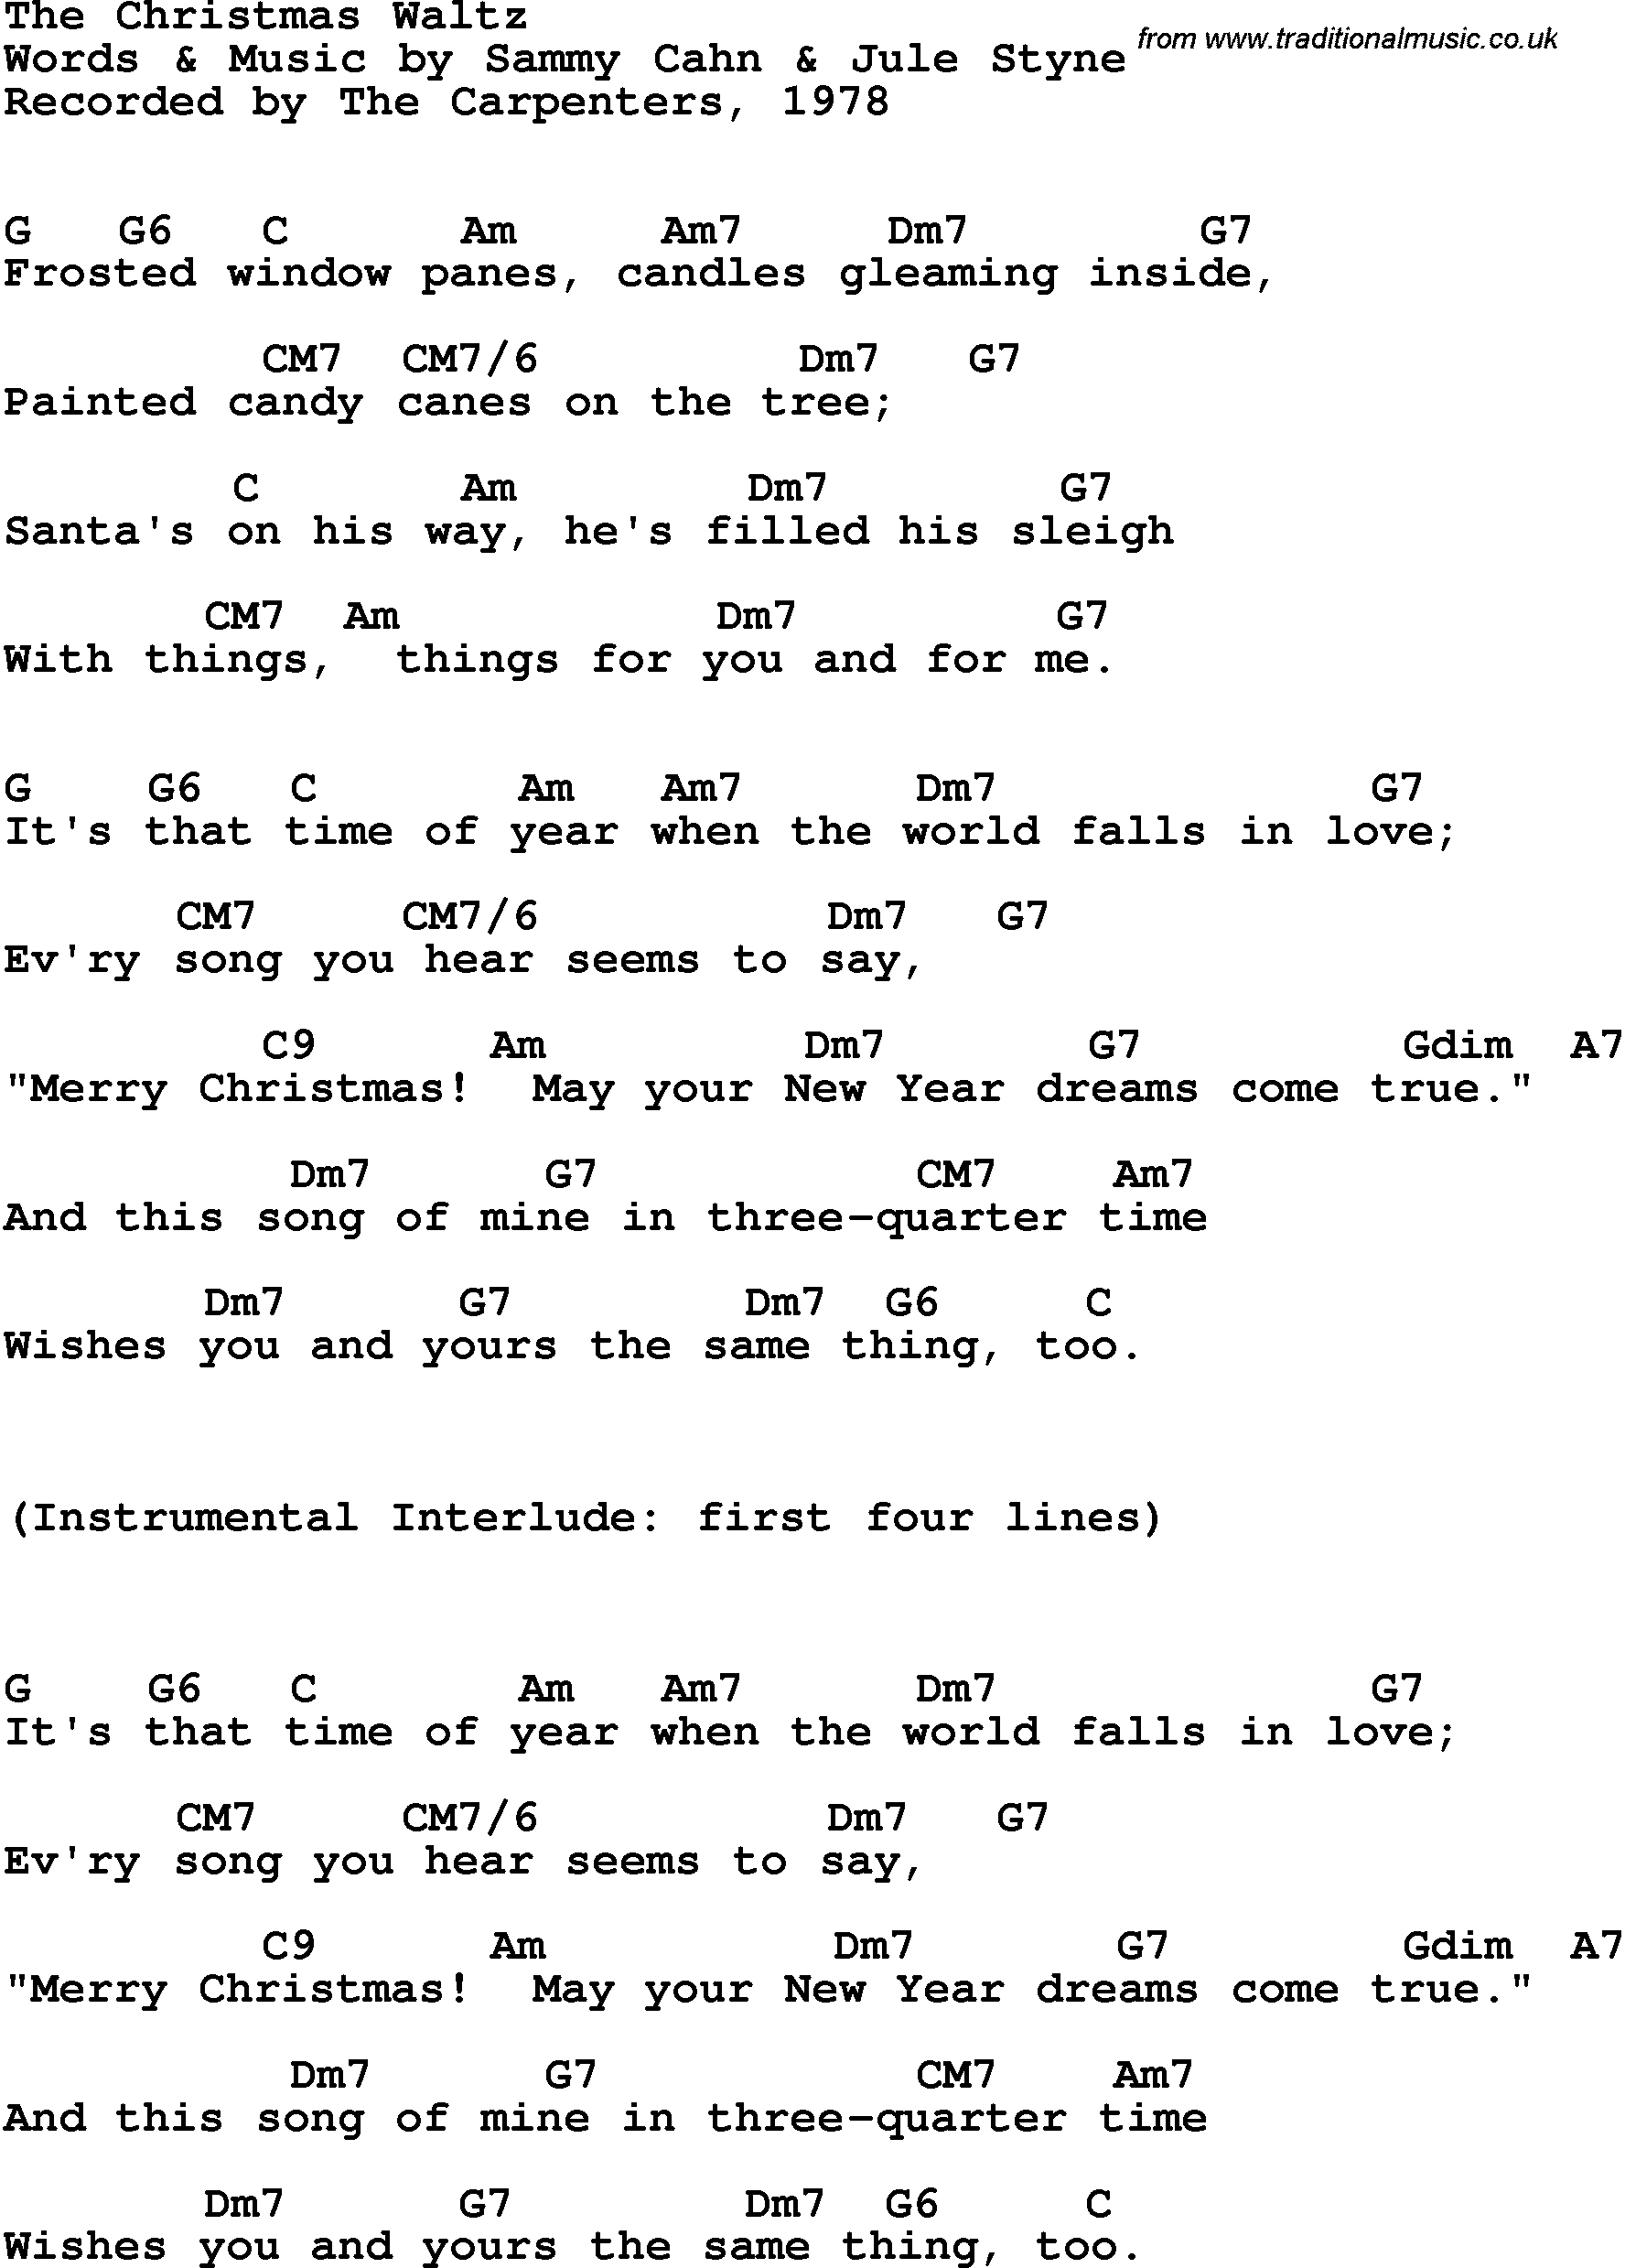 Song Lyrics with guitar chords for Christmas Waltz, The - The Carpenters, 1978